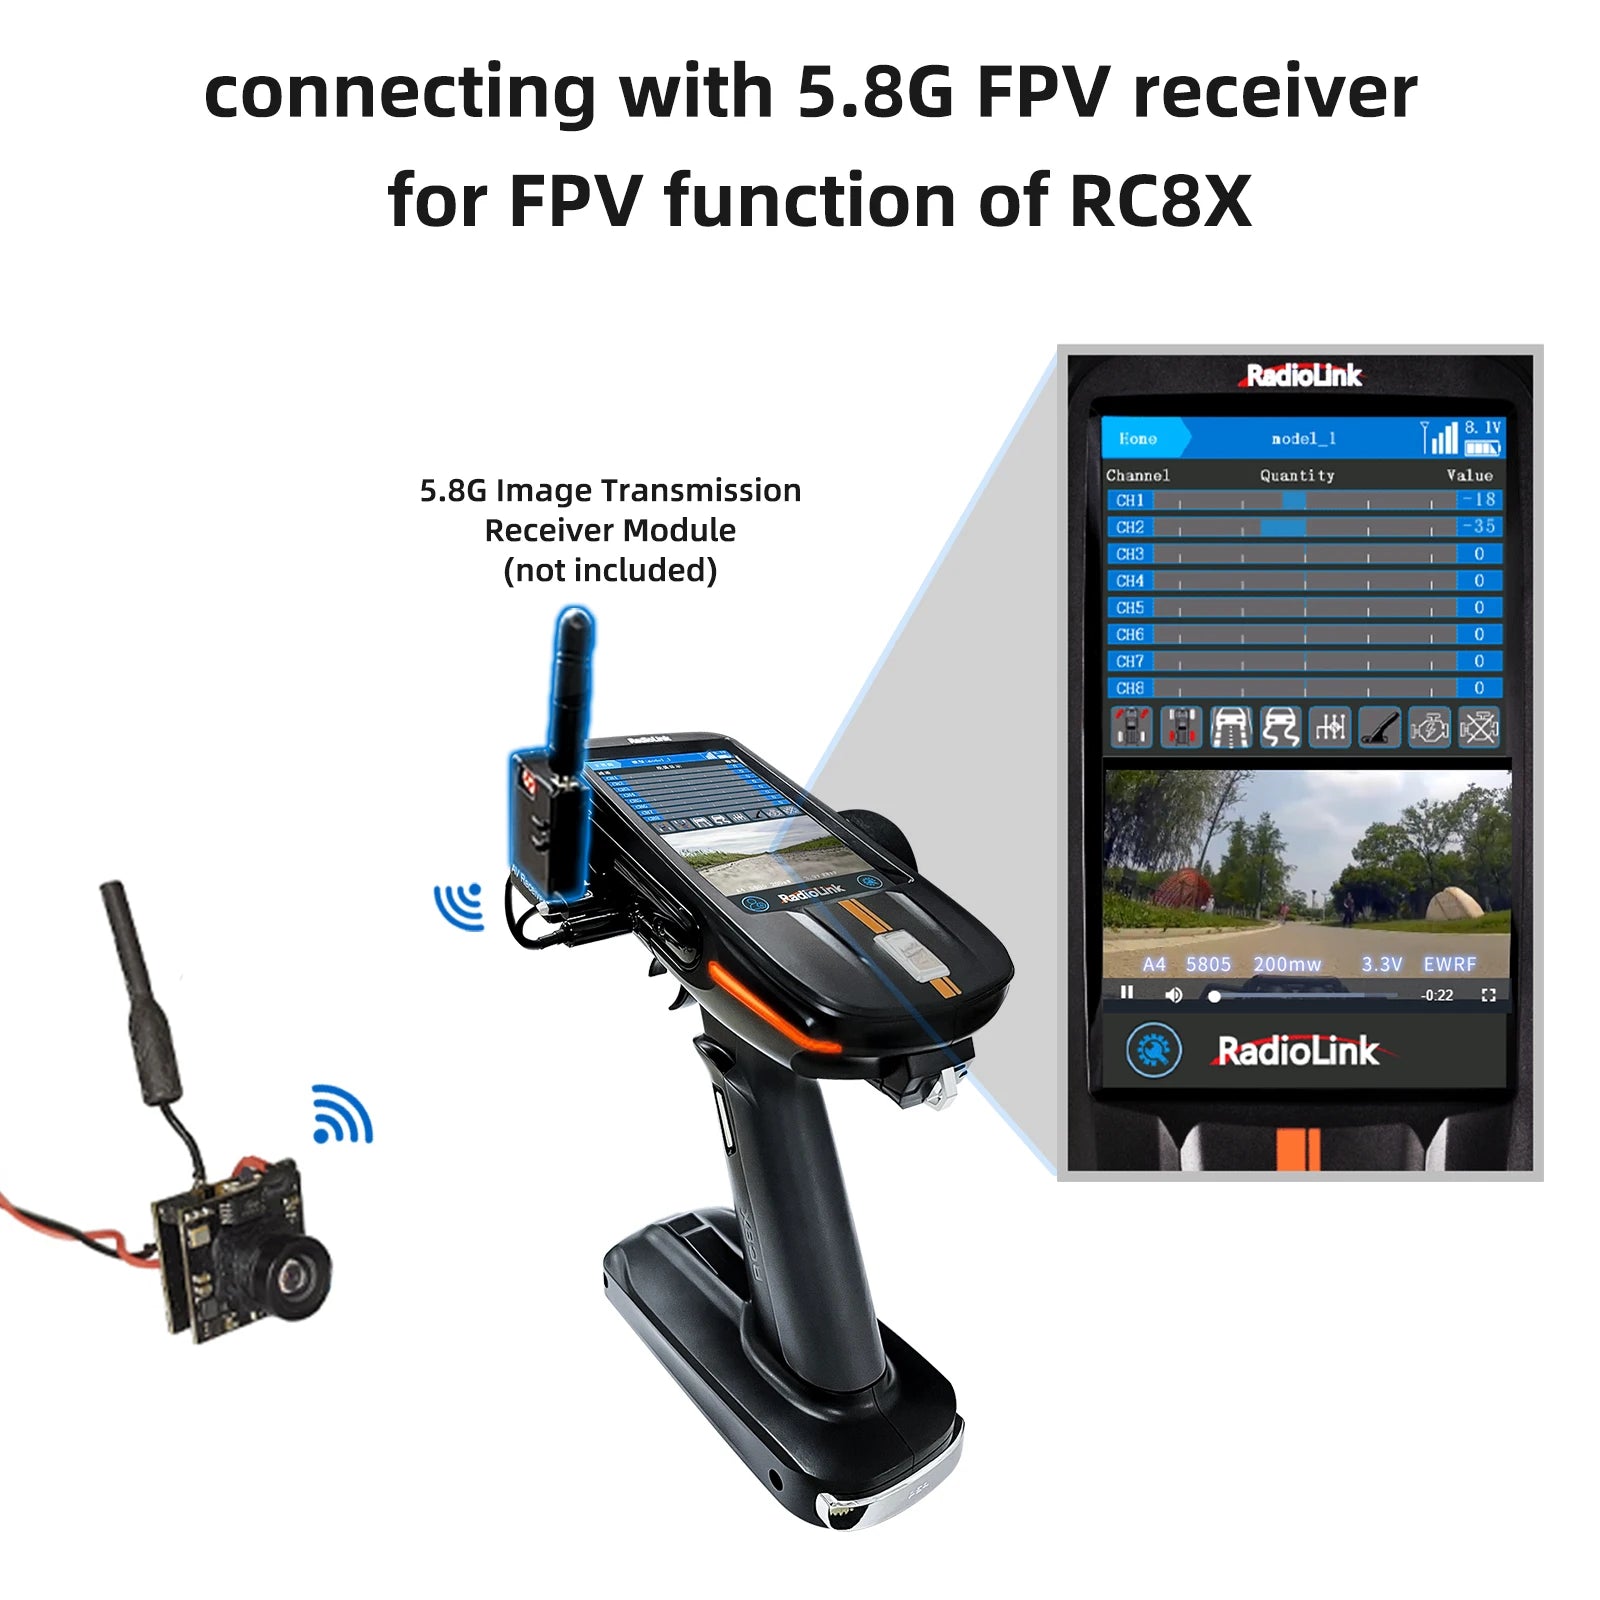 Radiolink EWRF 708R Receiver, 5.8G FPV receiver is compatible with RC8X RedioUink